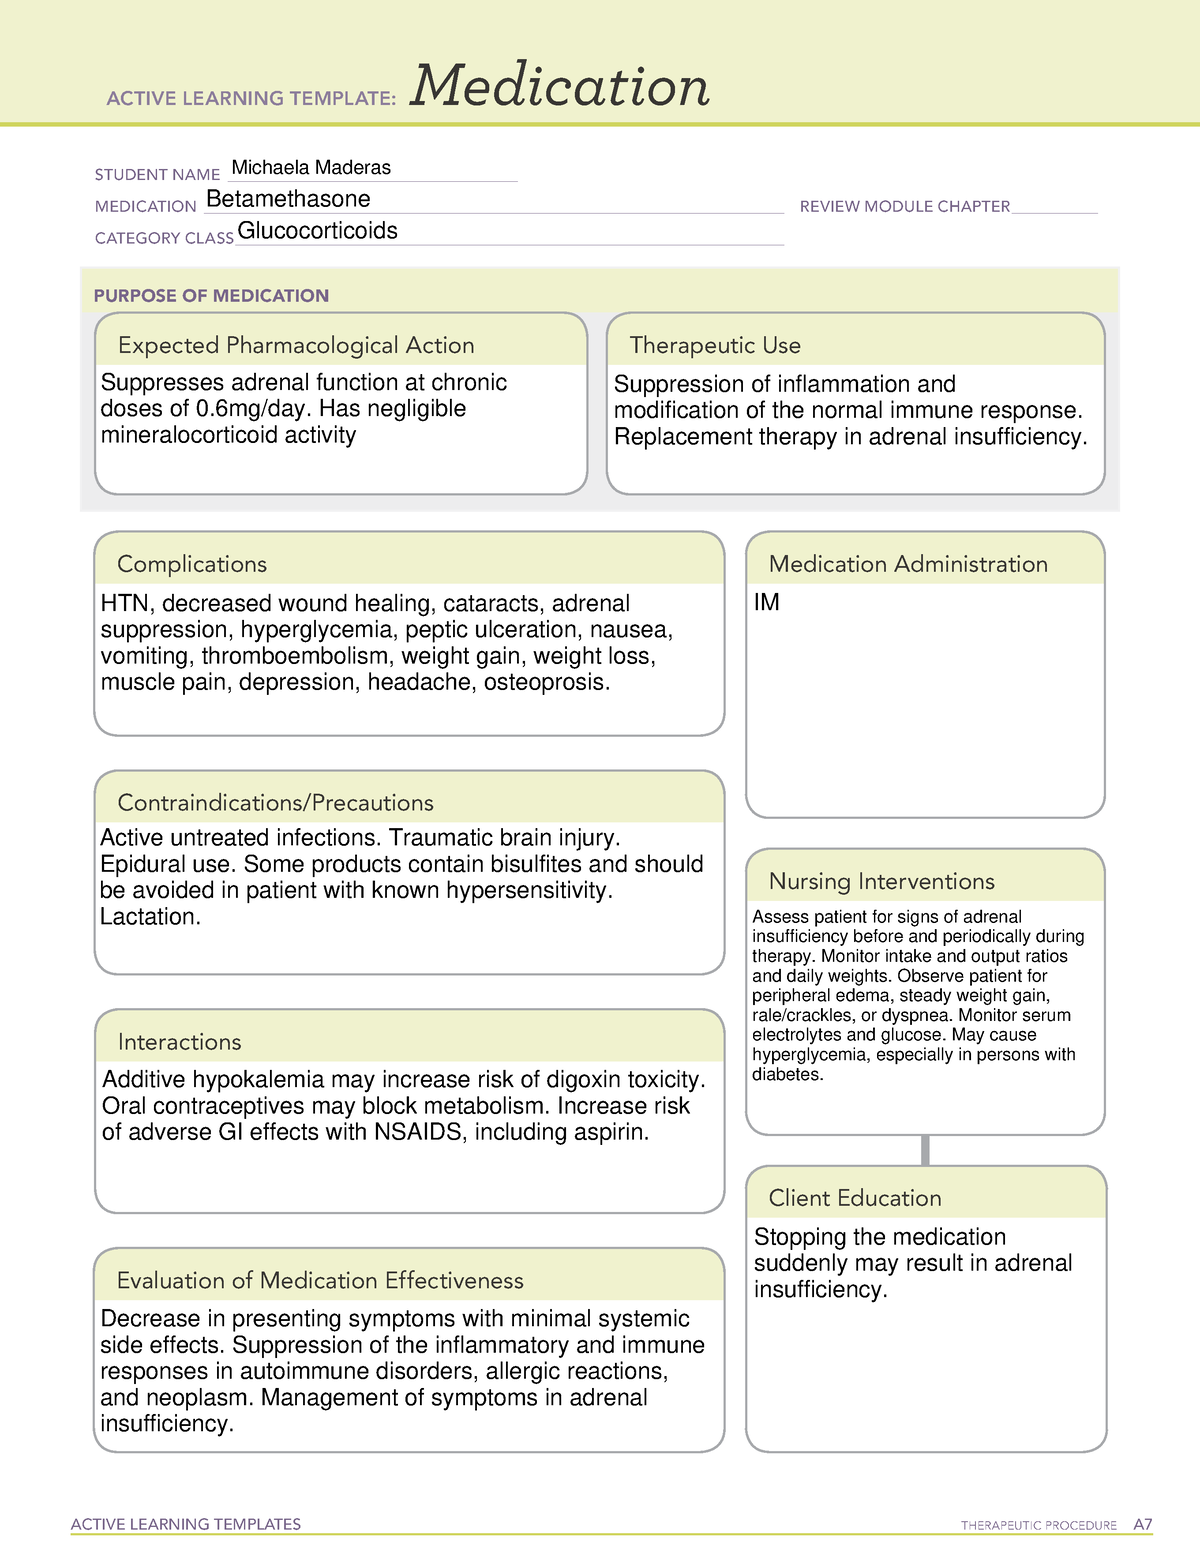 Bethamethasone Drug Card ACTIVE LEARNING TEMPLATES THERAPEUTIC 